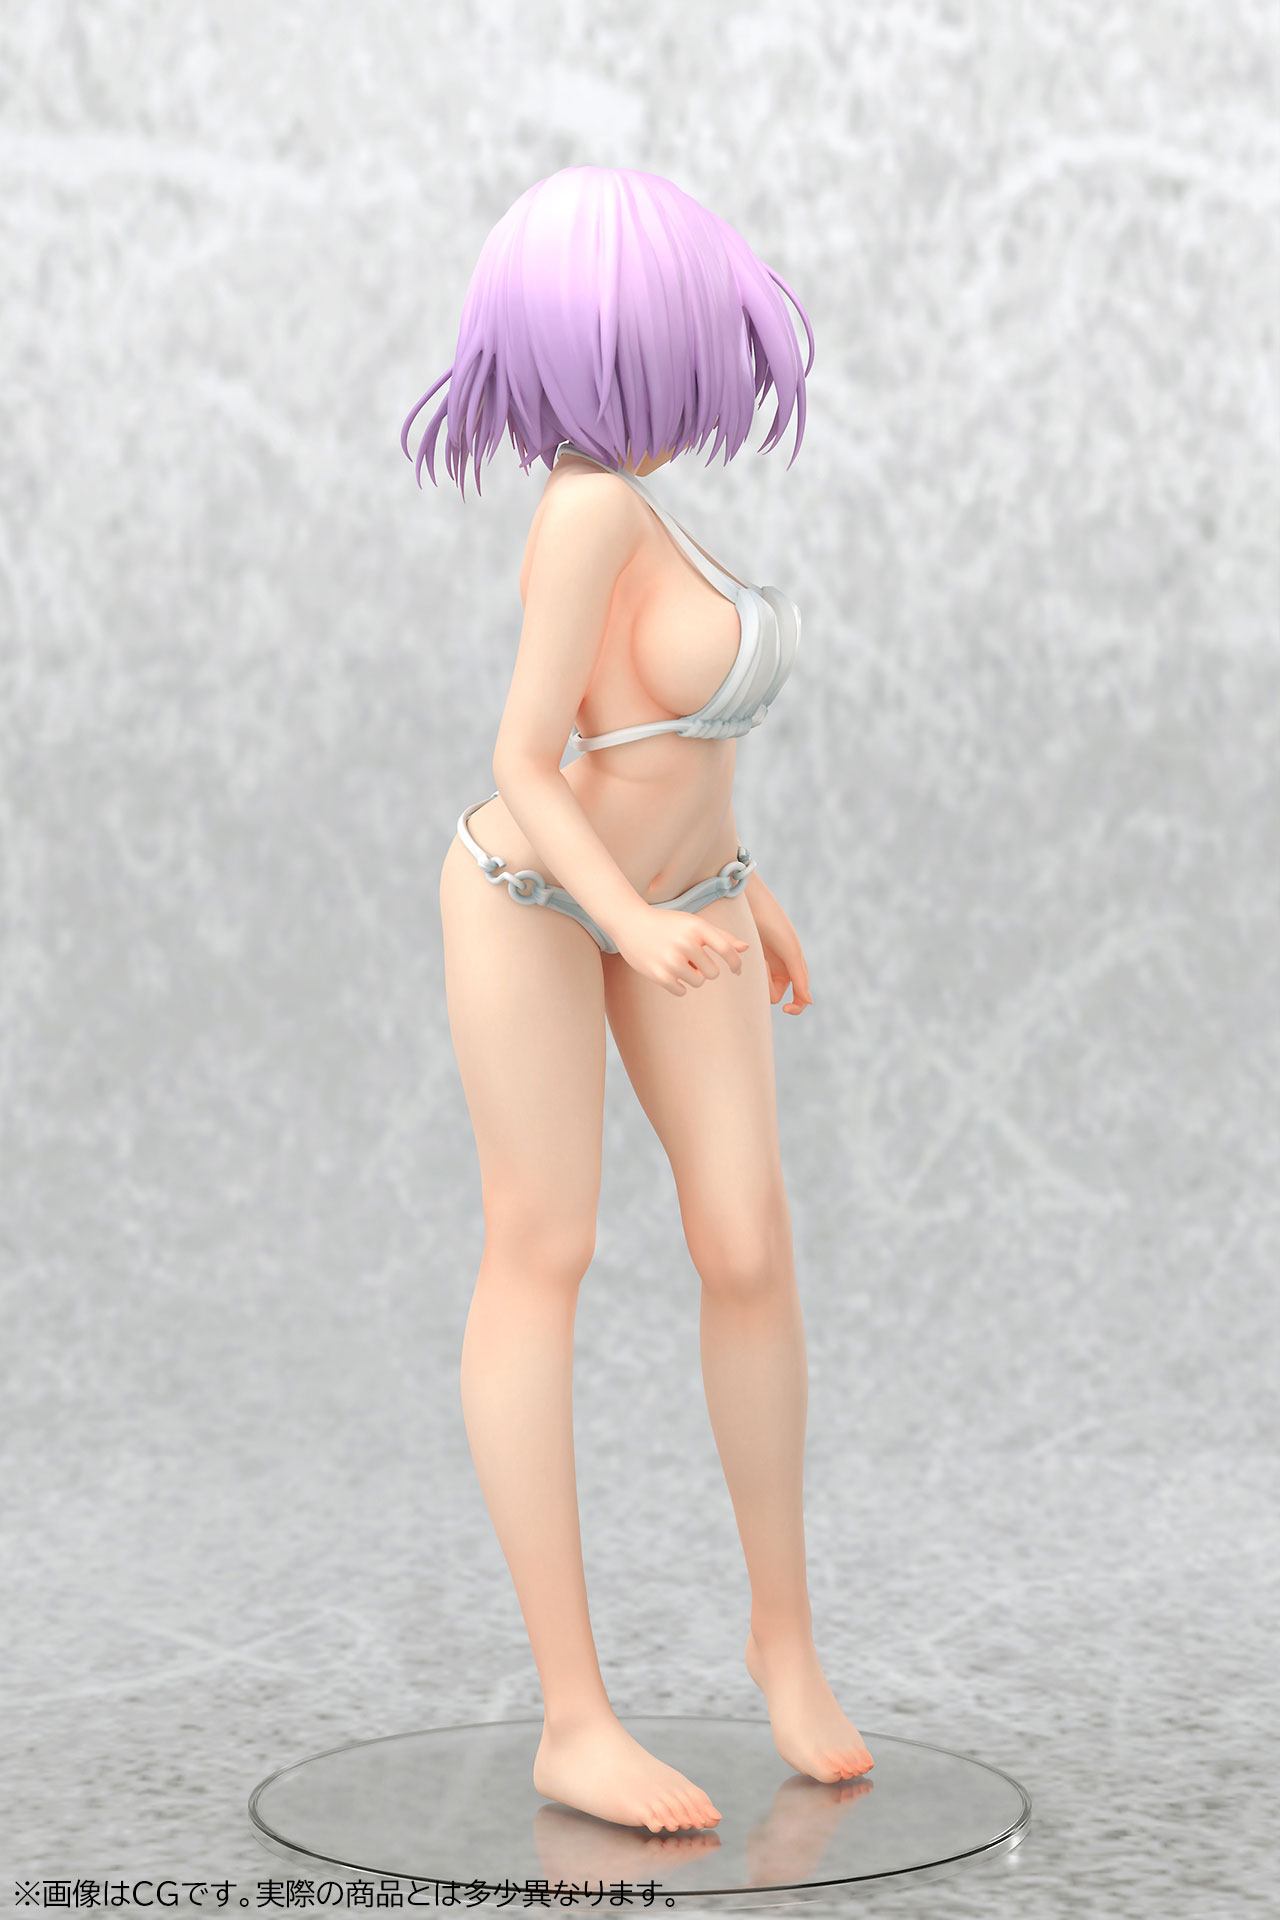 Swimmsuit Girl Collection